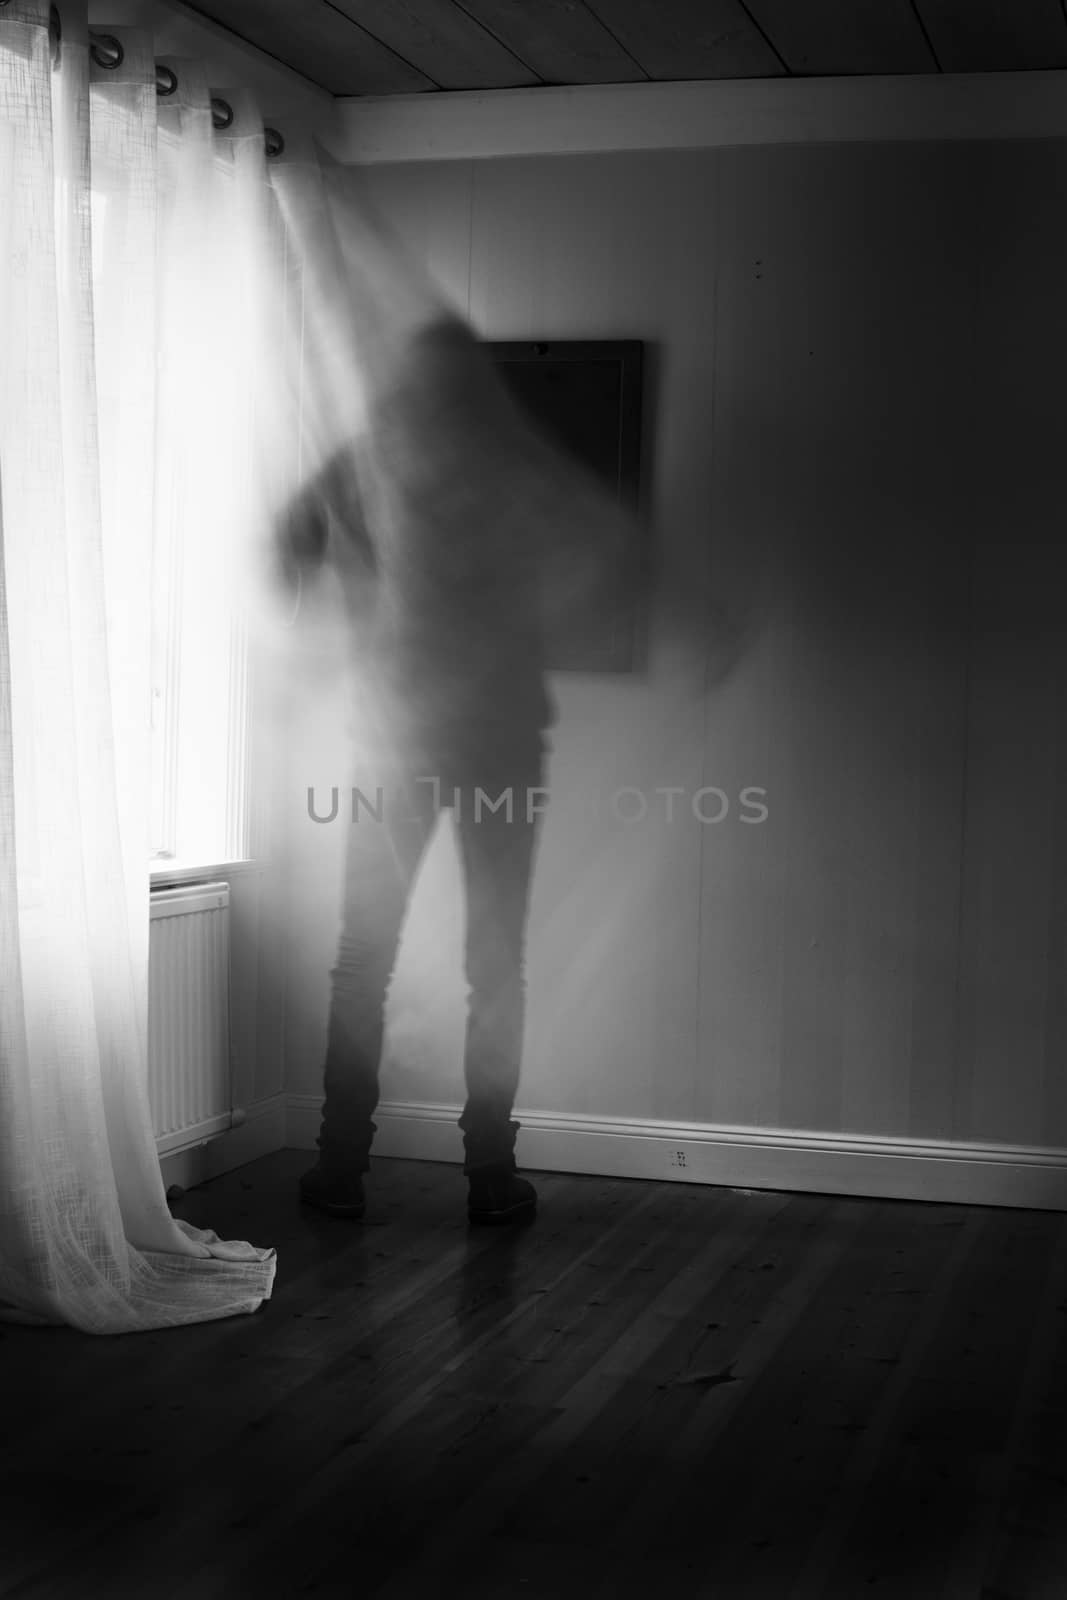 Person in motion blur in front of brightly lit window with curtain, spooky feeling in black and white.